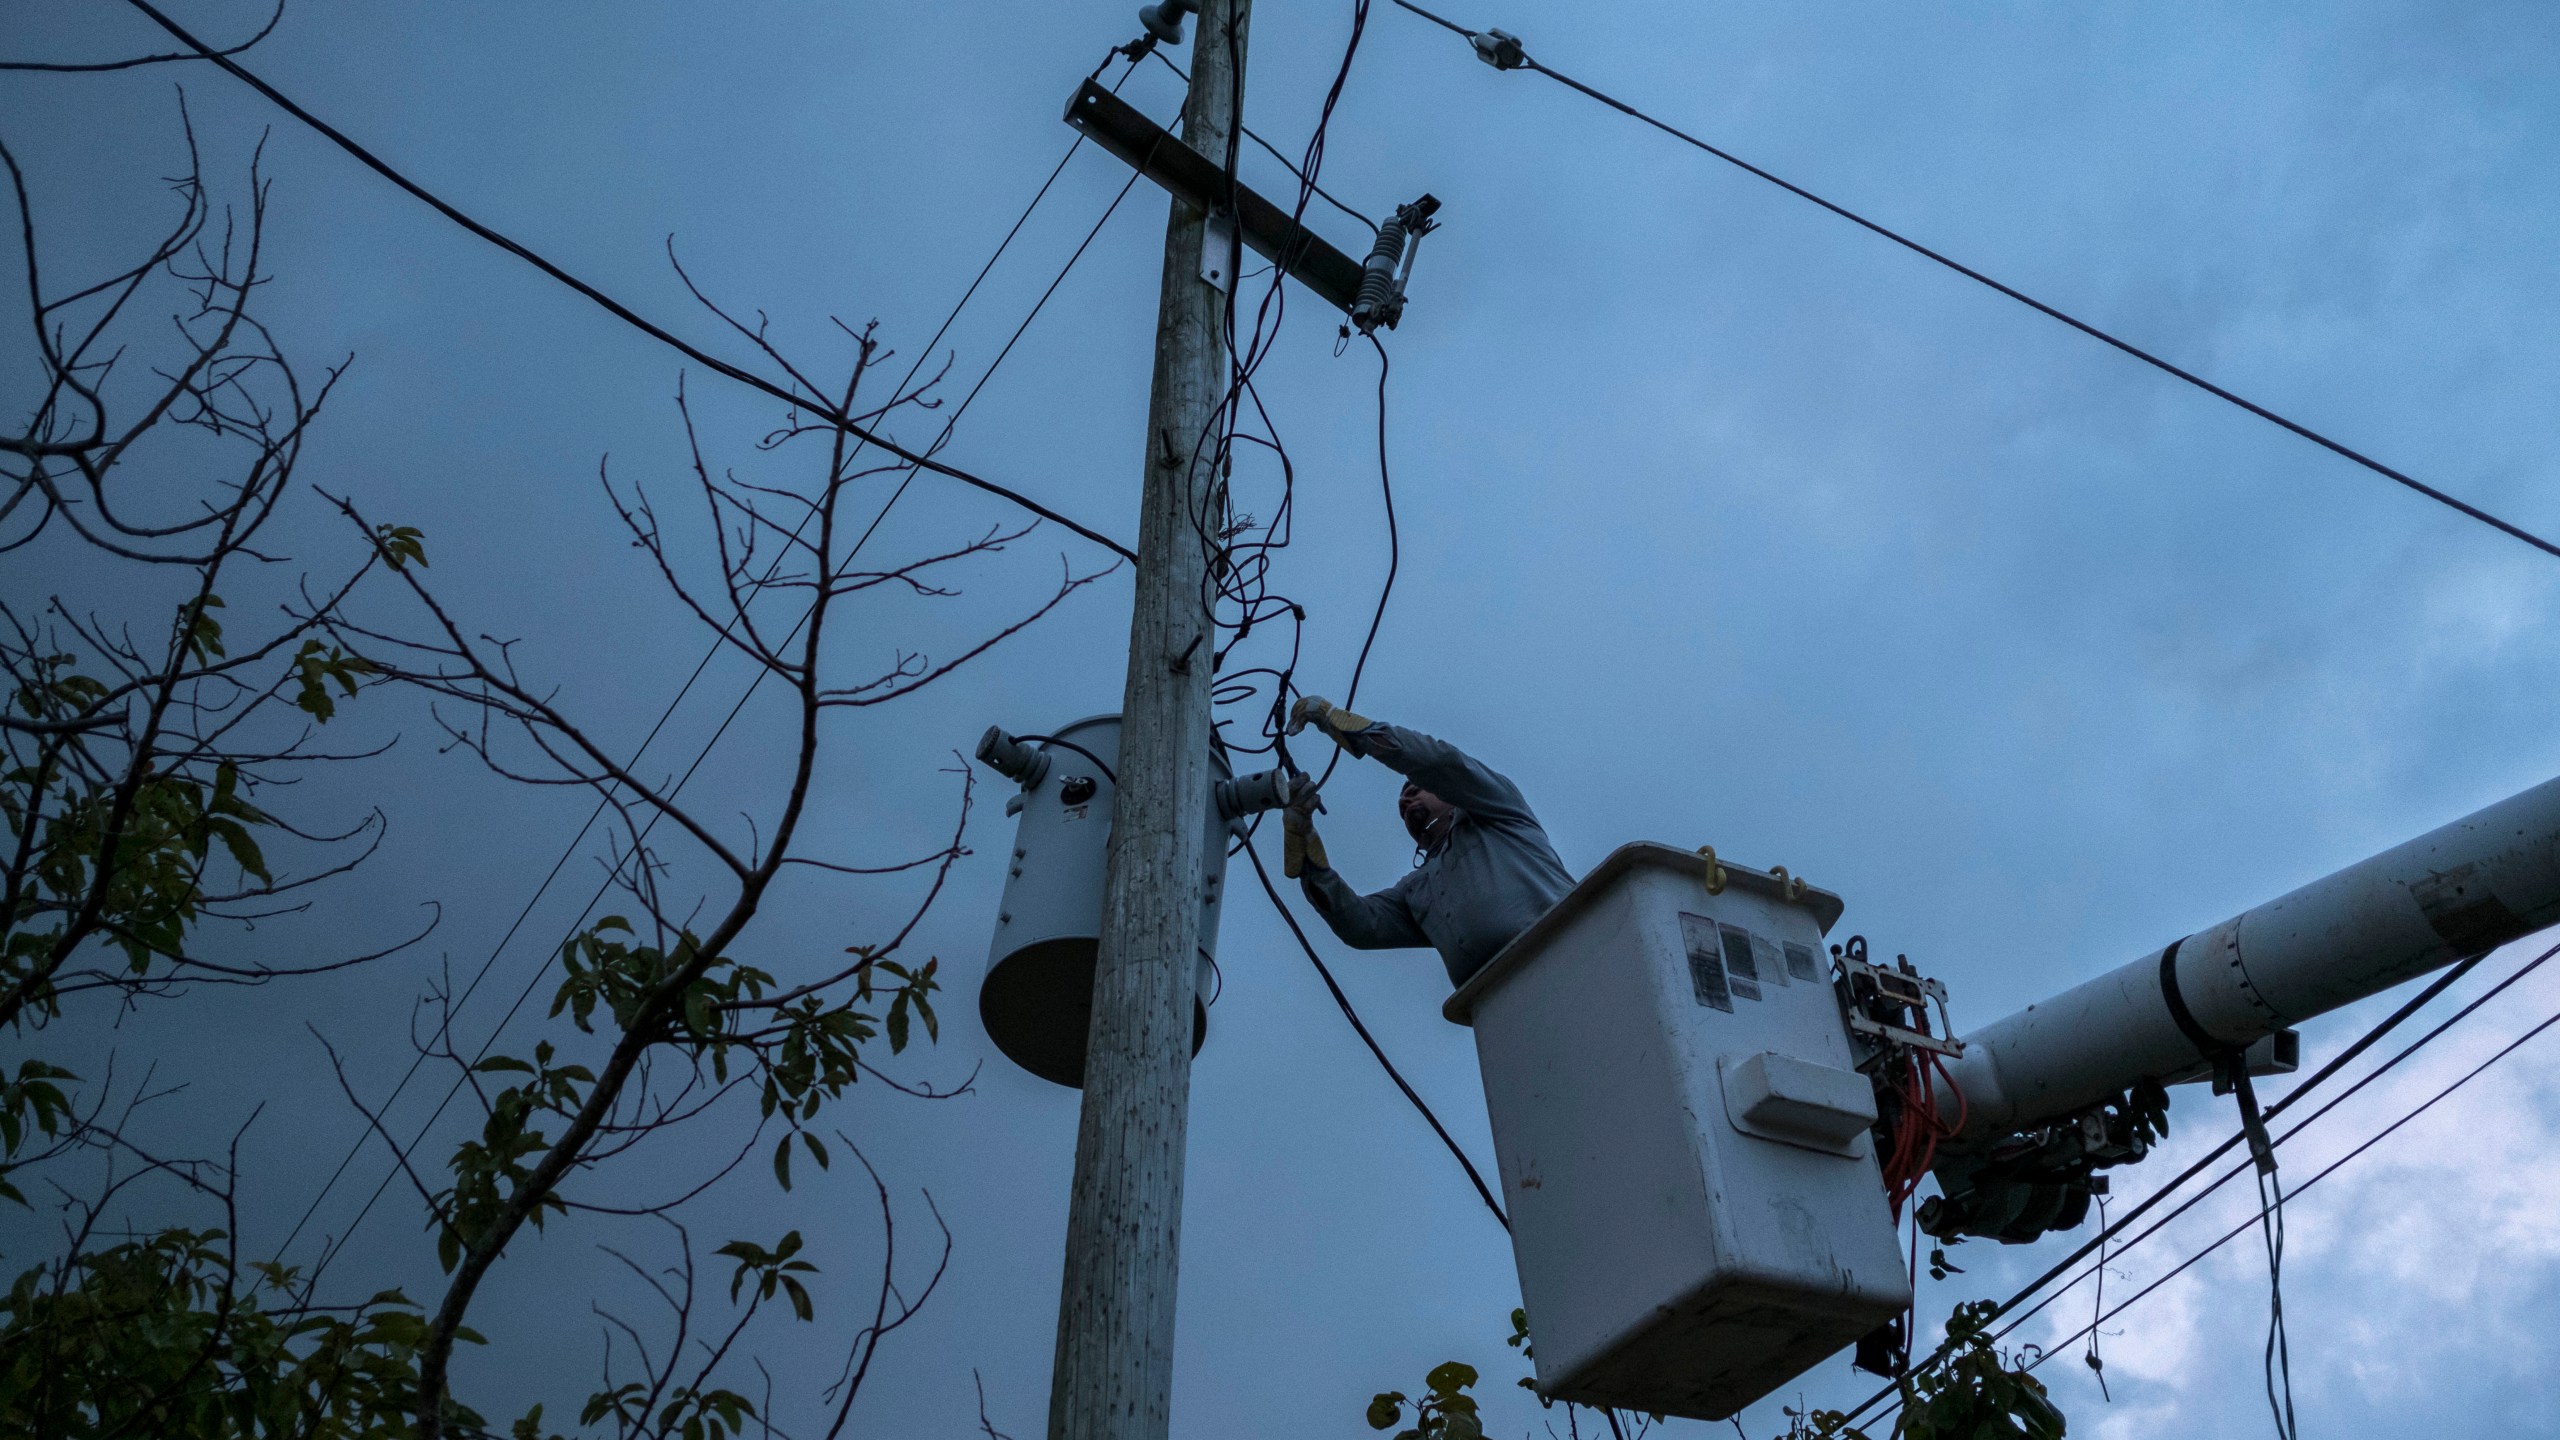 FILE - A worker from the Puerto Rico Power Authority works to restore power in Adjuntas, Puerto Rico, July 12, 2018. A key hearing over the future of Puerto Rico’s crumbling power company and its $9 billion debt began on March 4, 2024, in federal court following years of talks between the U.S. territory's government and creditors seeking to recover their investments. (AP Photo/Dennis M. Rivera Pichardo, File)